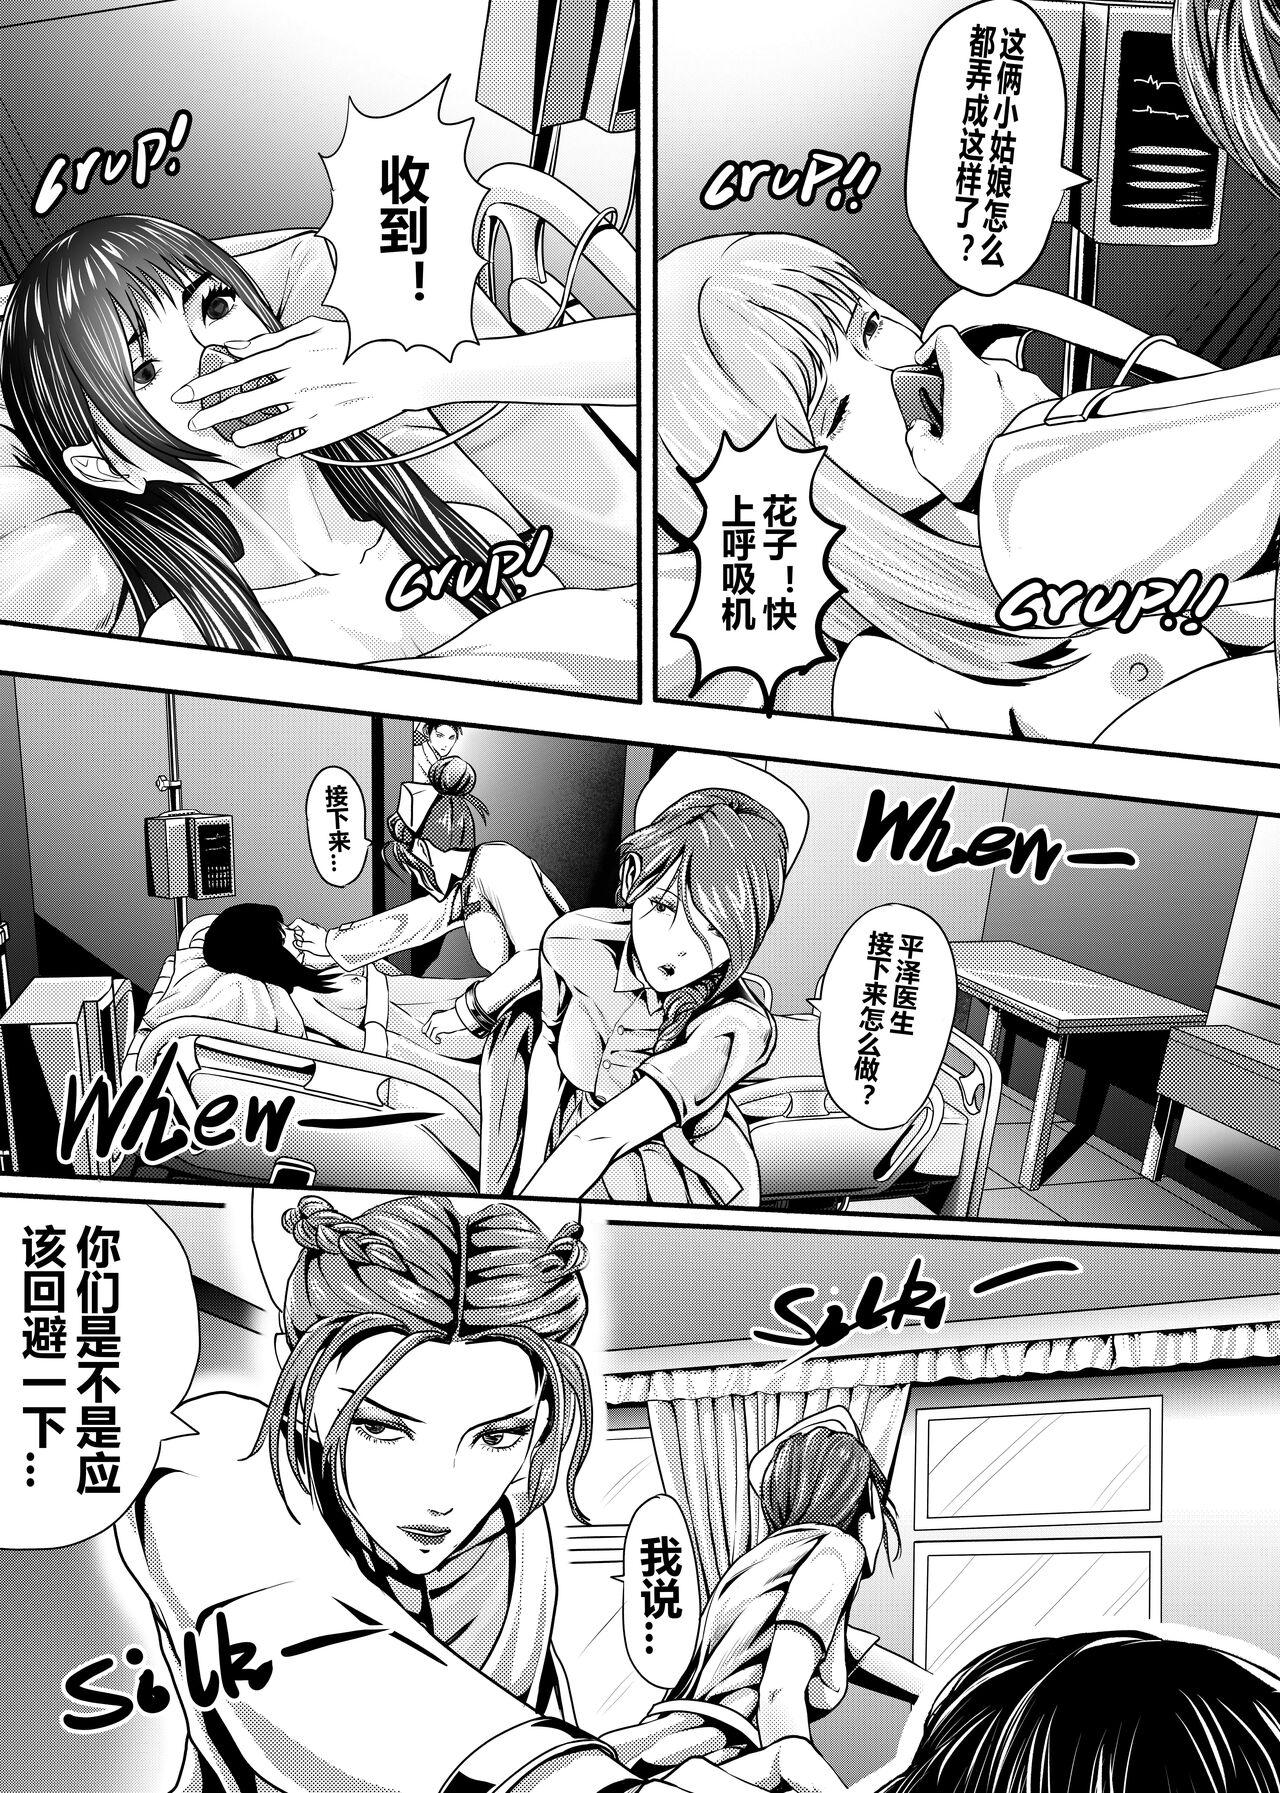 [KAO.YELLOW STUDIO (T.C.X)] I must be out of my mind to fall in love with SAORI, the Snuff Queen Ch.1-16 | 想与冰恋女王纱织同学谈恋爱的我脑子一定有问题 第1-16话 [Chinese] 183